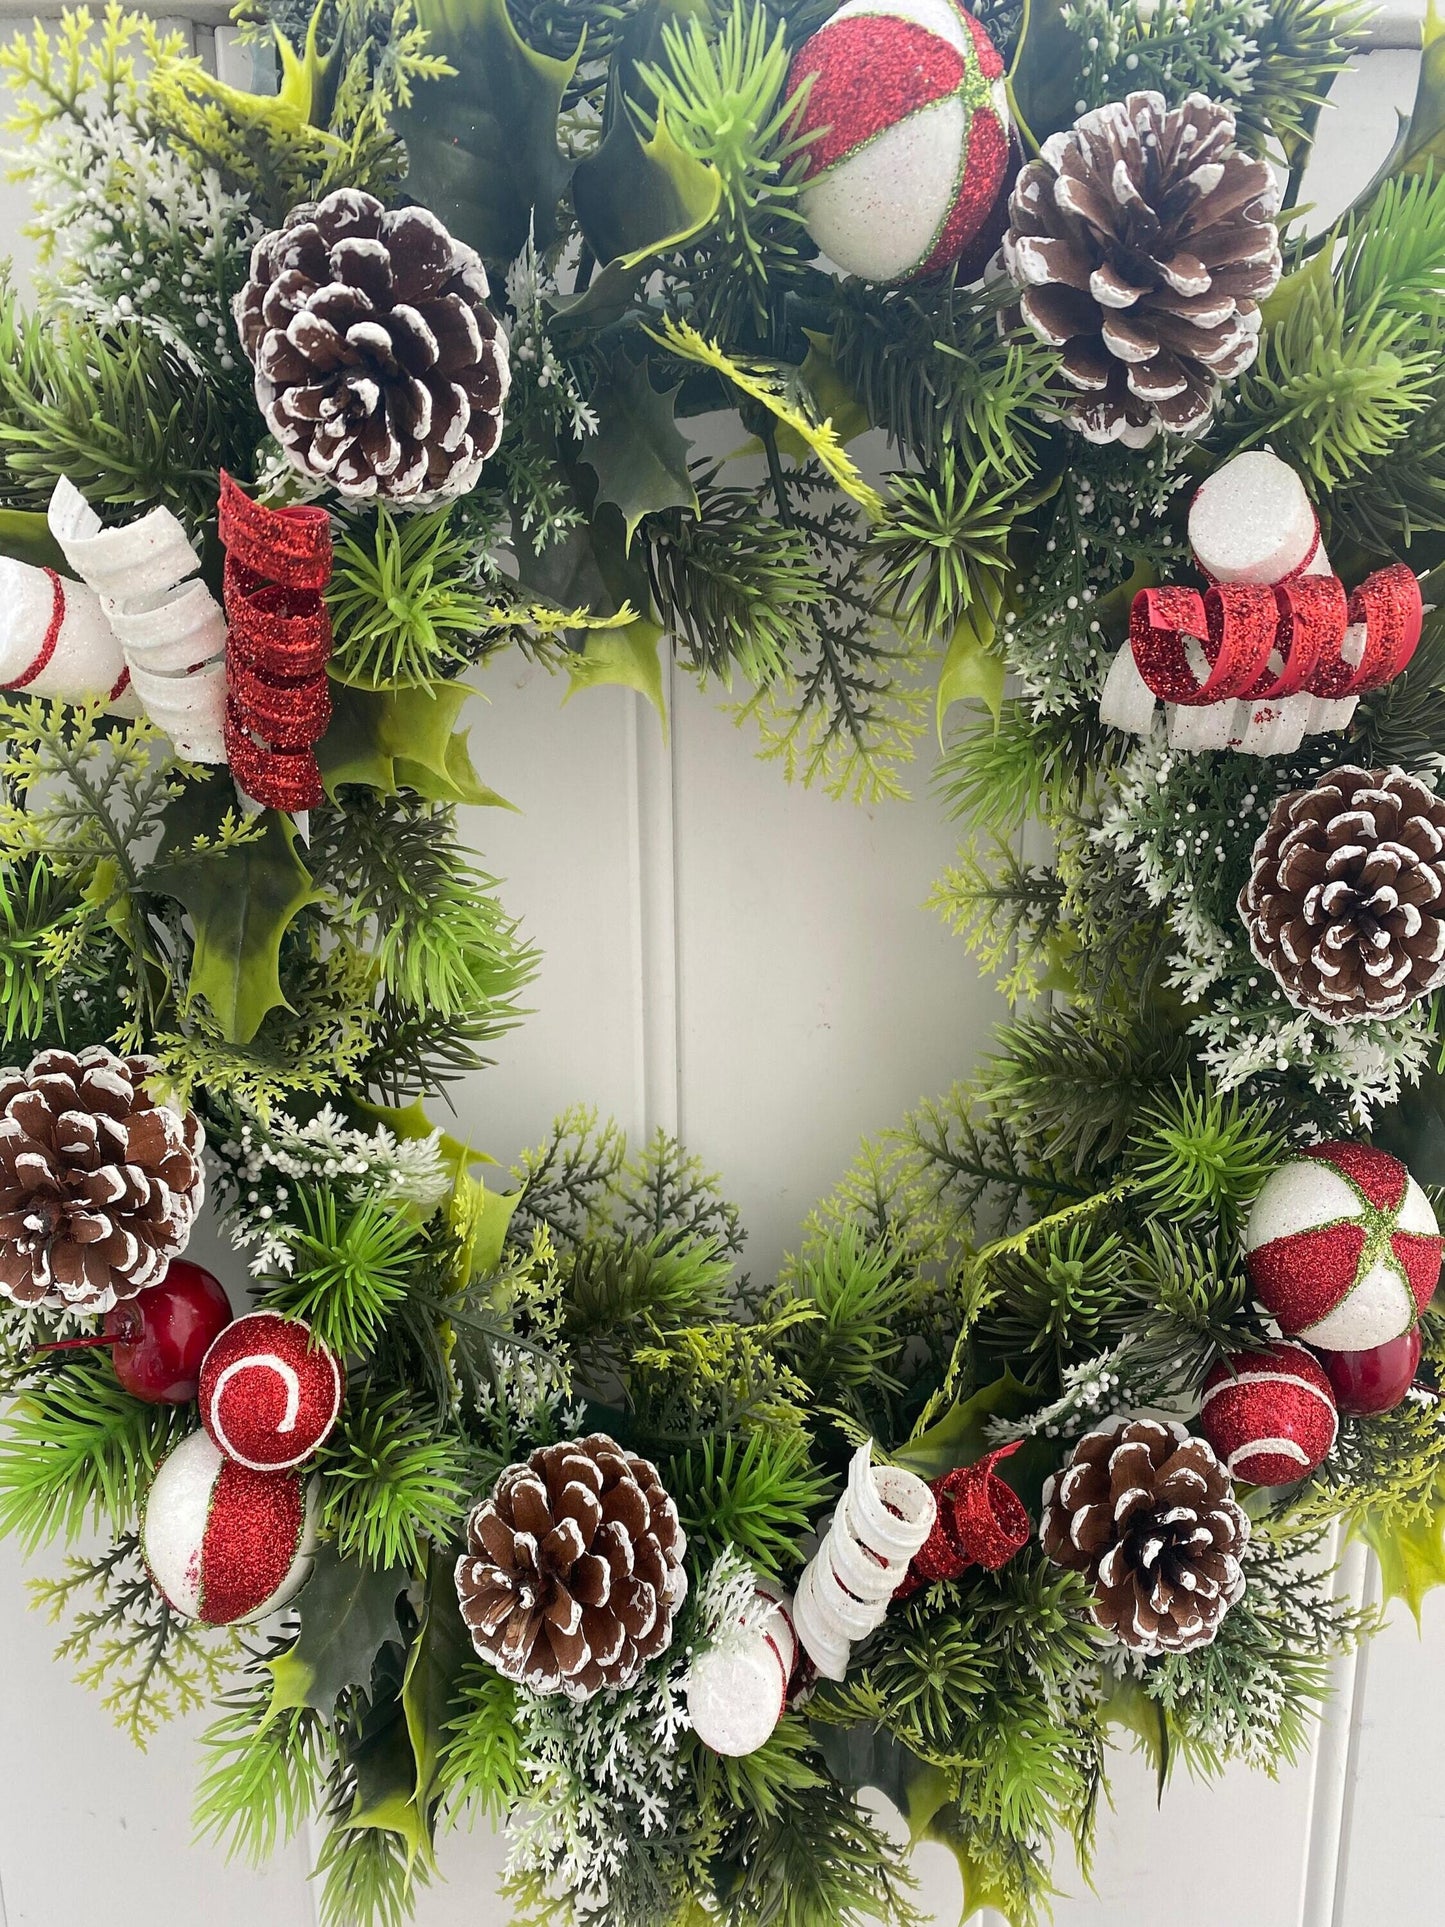 Large Artificial Christmas Wreath 17.5 inches Diameter